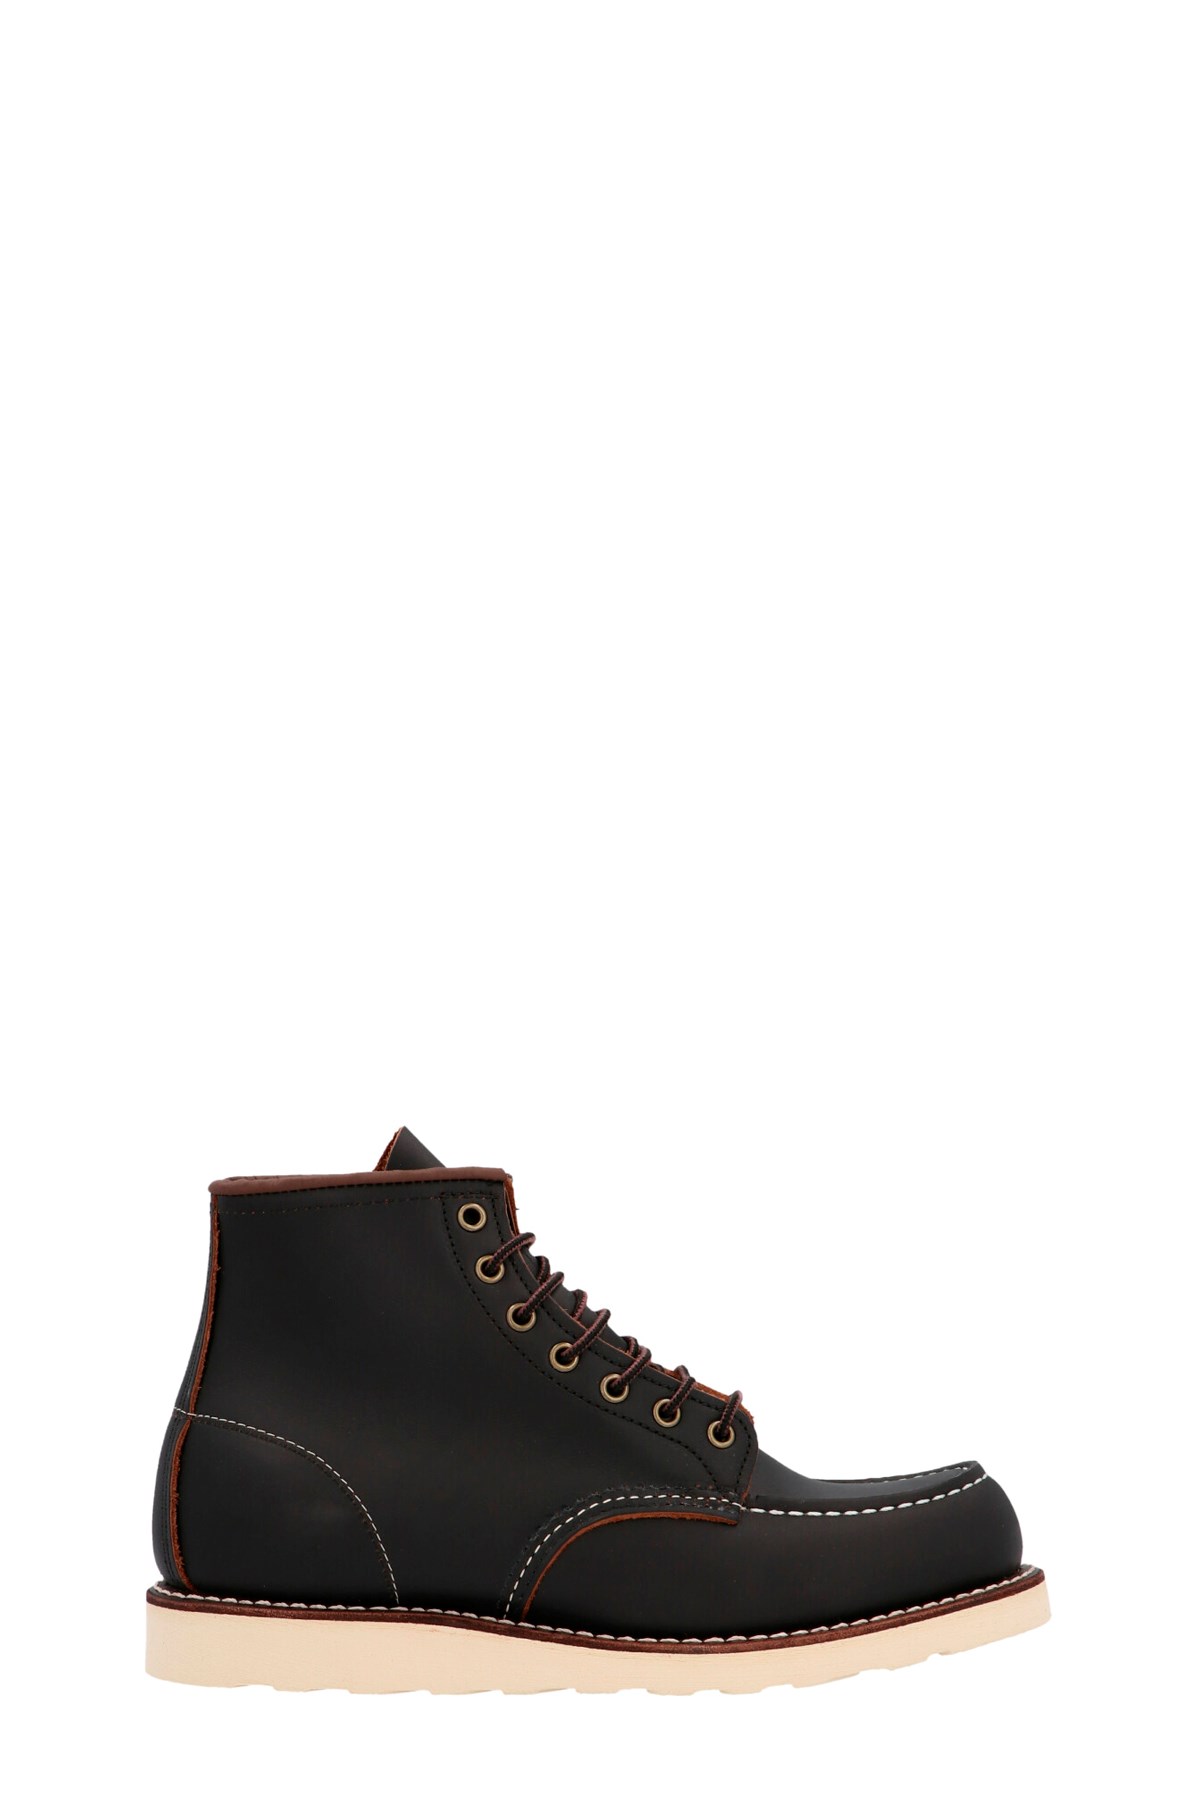 RED WING SHOES 'Heritage 6 Inch Moc Toe’ Ankle Boots